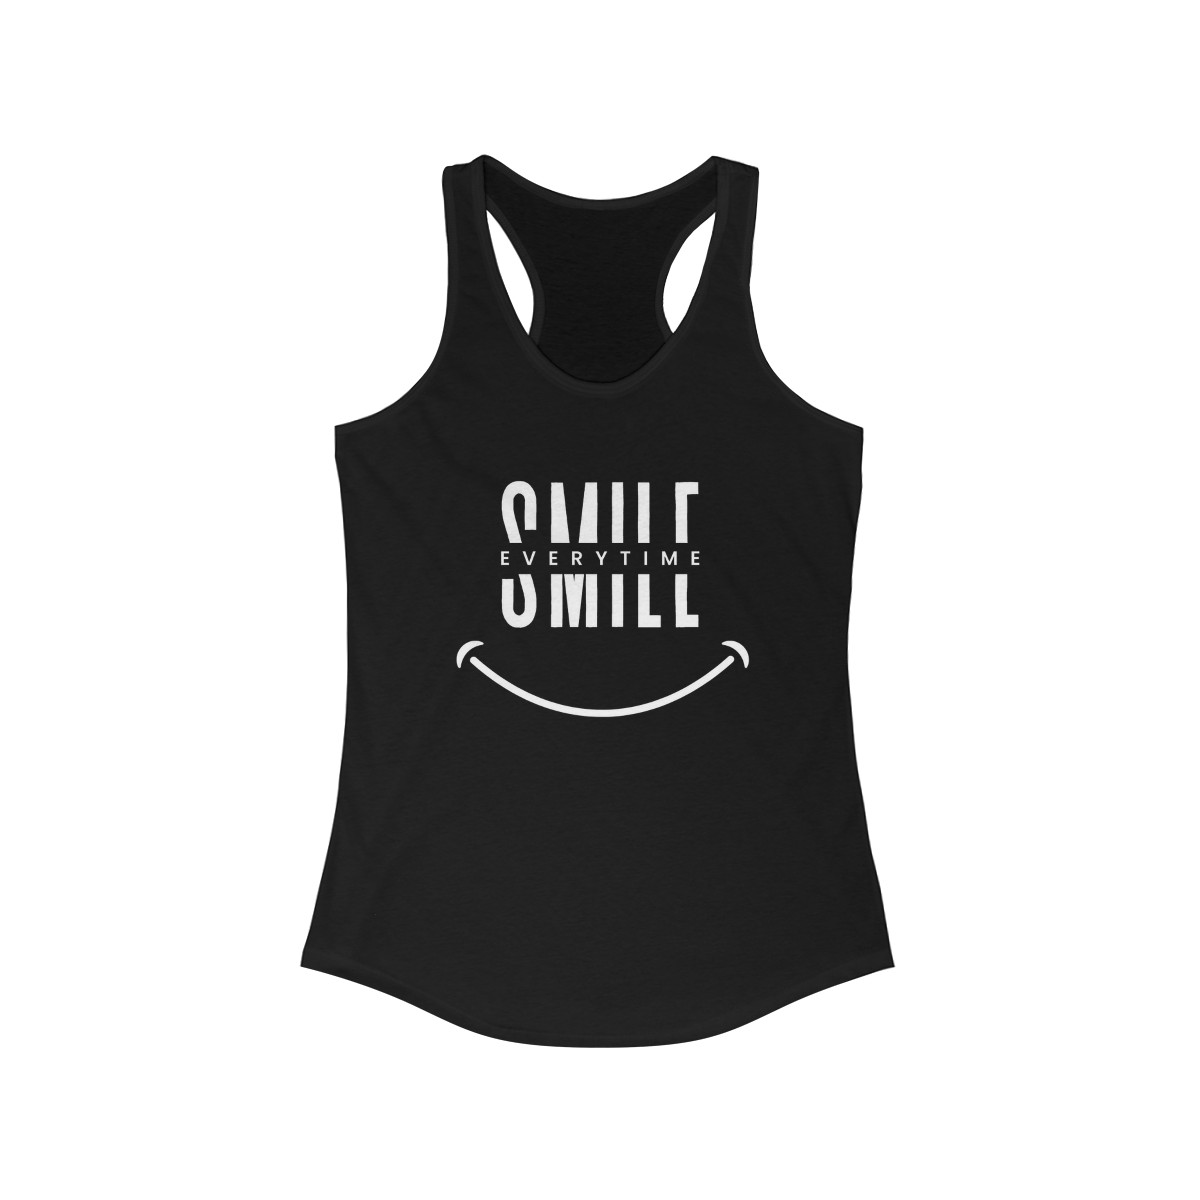 Sleek Racerback Tank: Perfect for Women's Active Lifestyle product thumbnail image